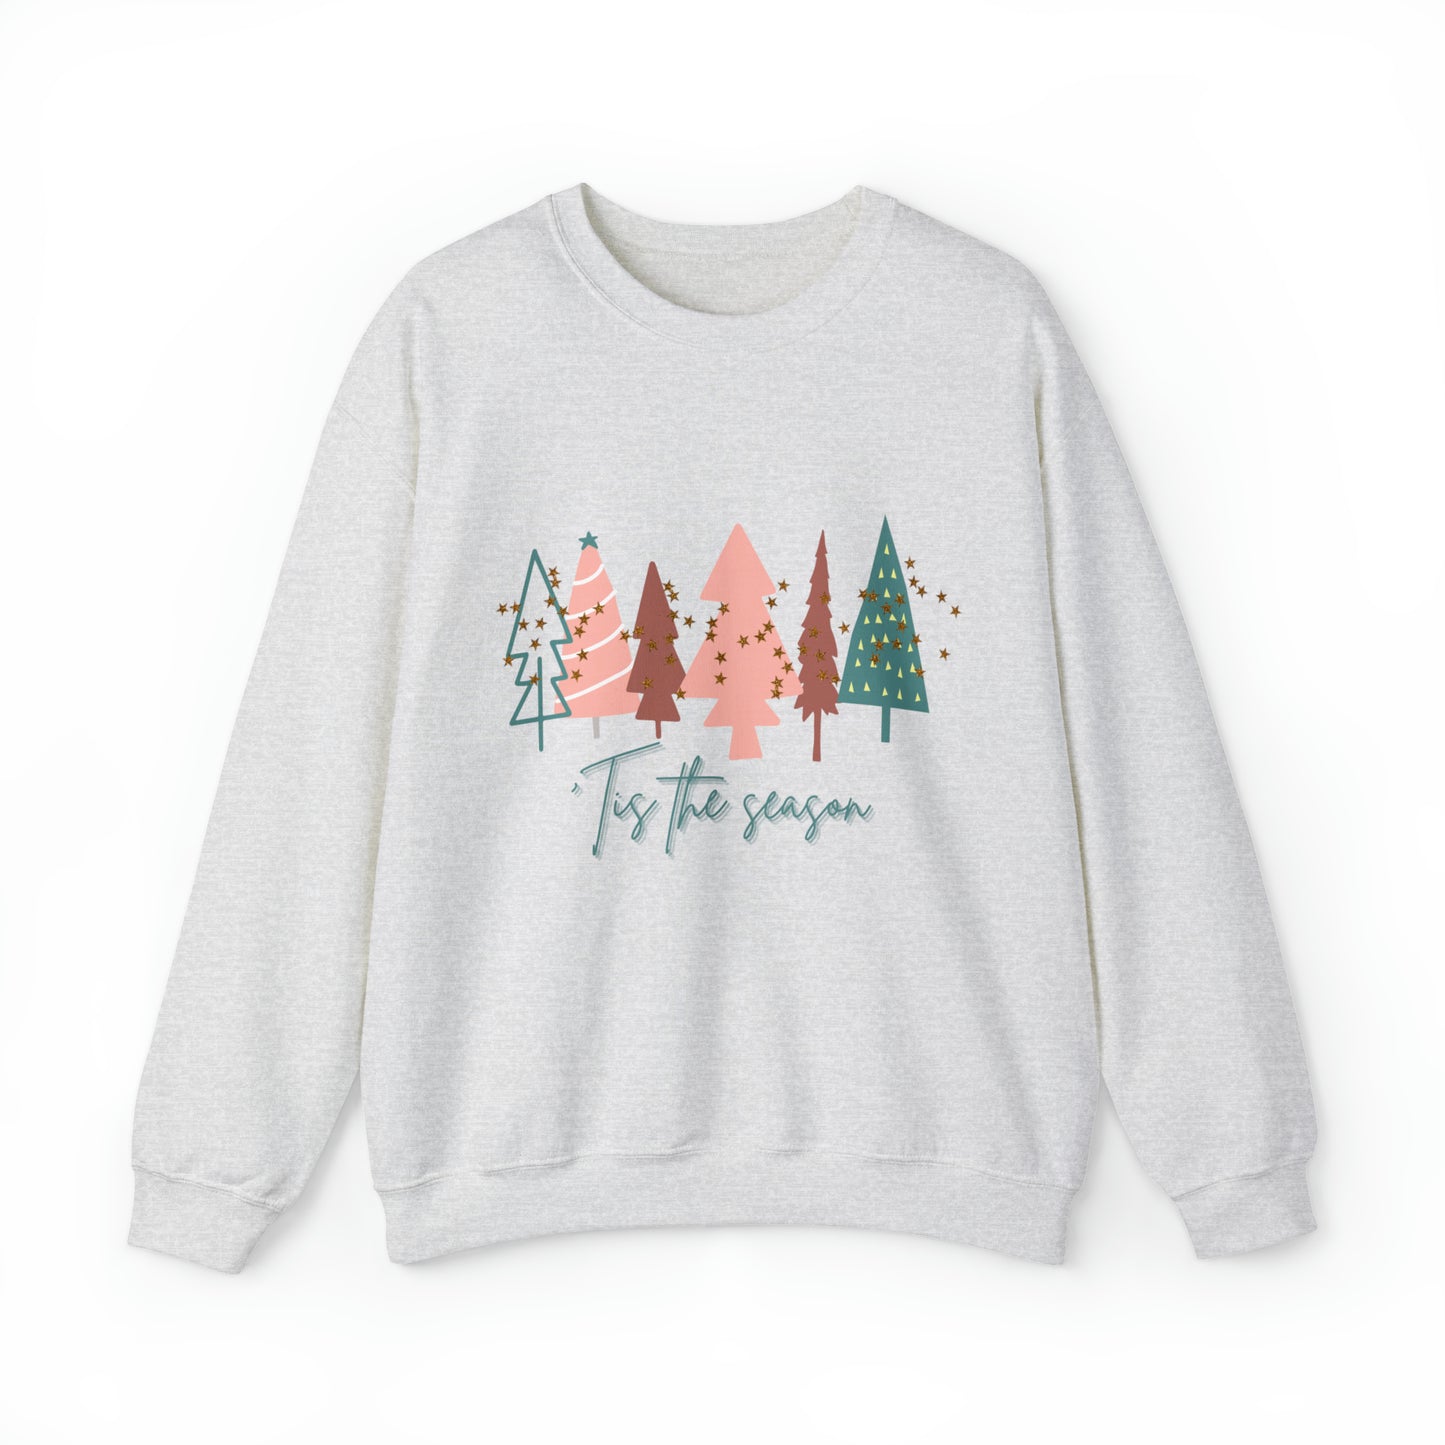 Stay cozy and festive this winter with a Printify Christmas Tree sweatshirt, perfect for the season.